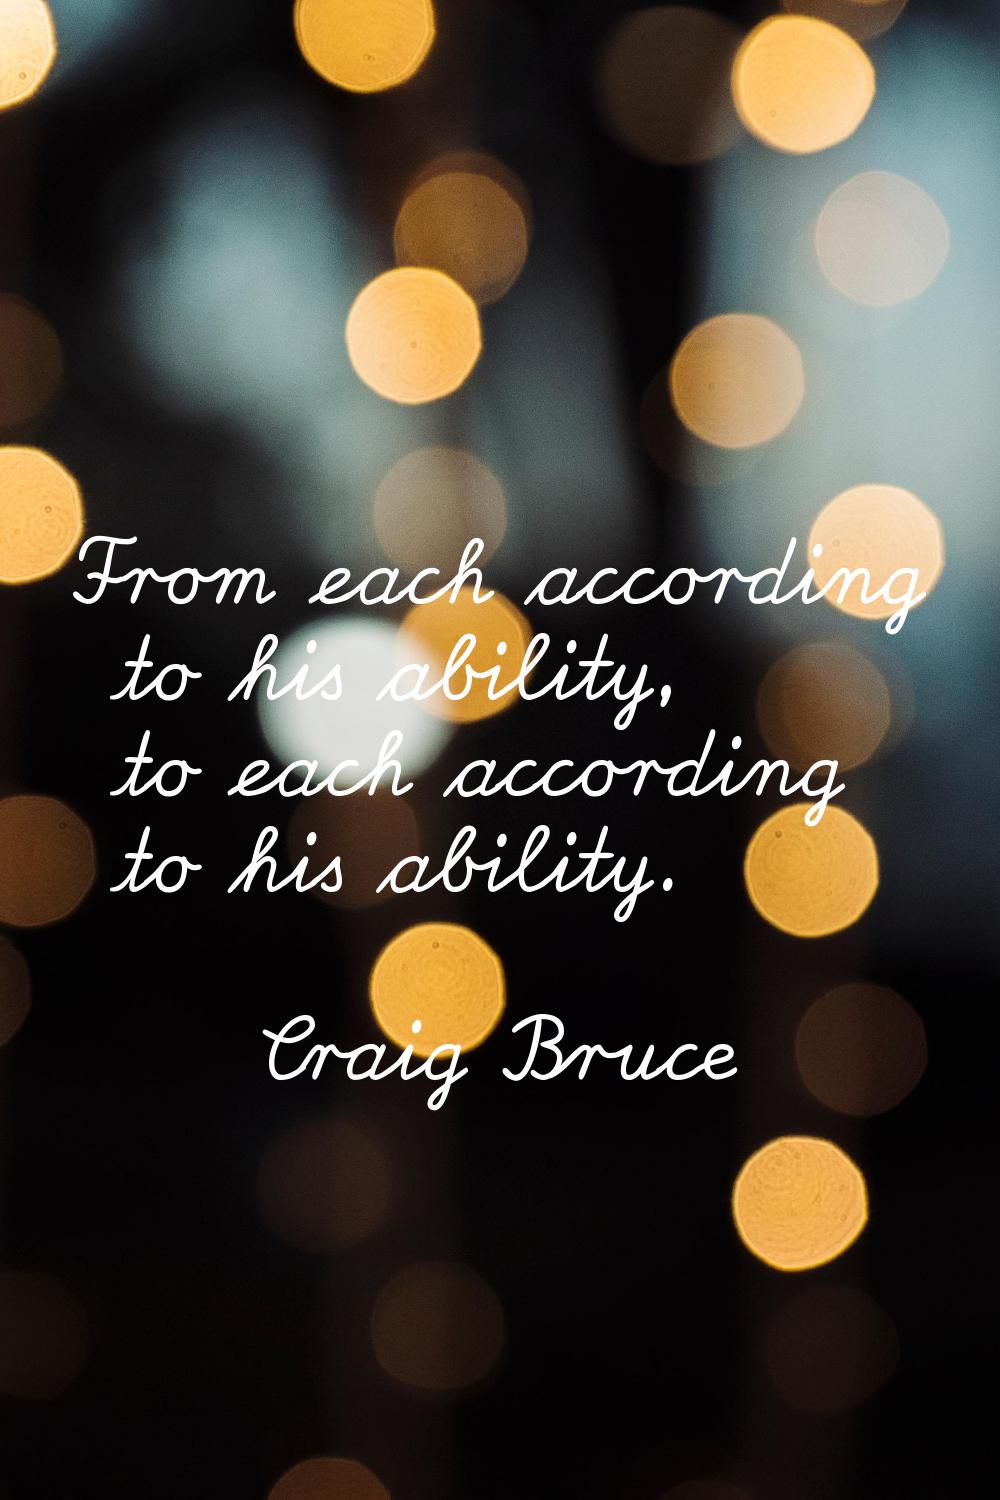 From each according to his ability, to each according to his ability.